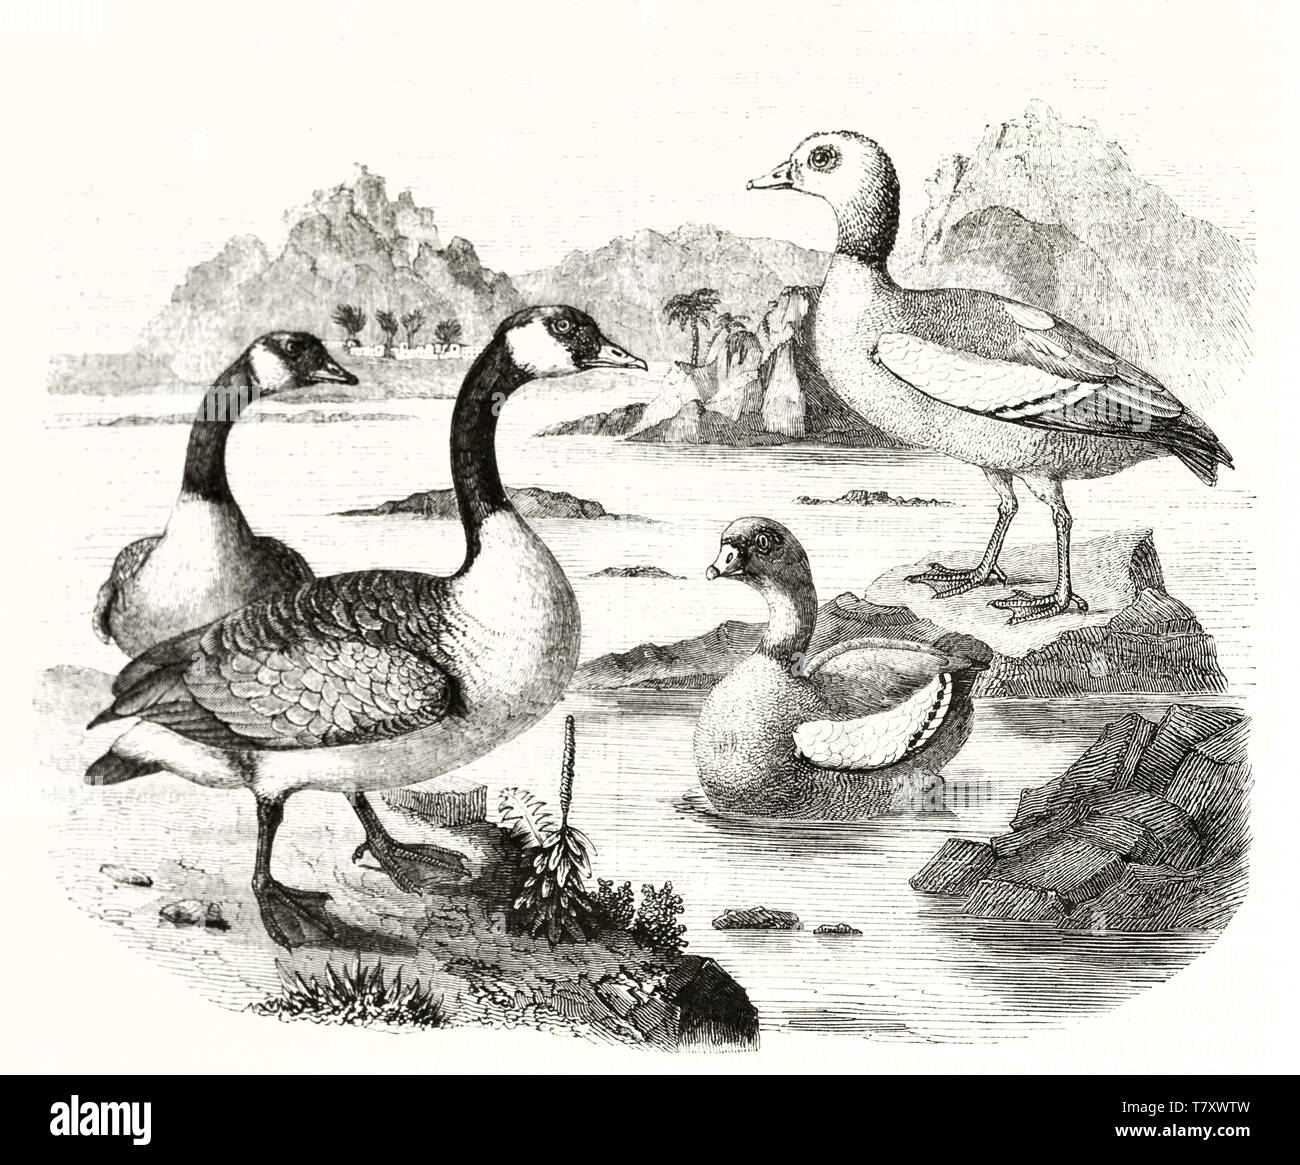 Old grayscale illustration of Canada goose (Branta canadensis) and Egyptian goose (Alopochen aegyptiaca) in a natural context rich of water. By Werner publ. on Magasin Pittoresque Paris 1848 Stock Photo